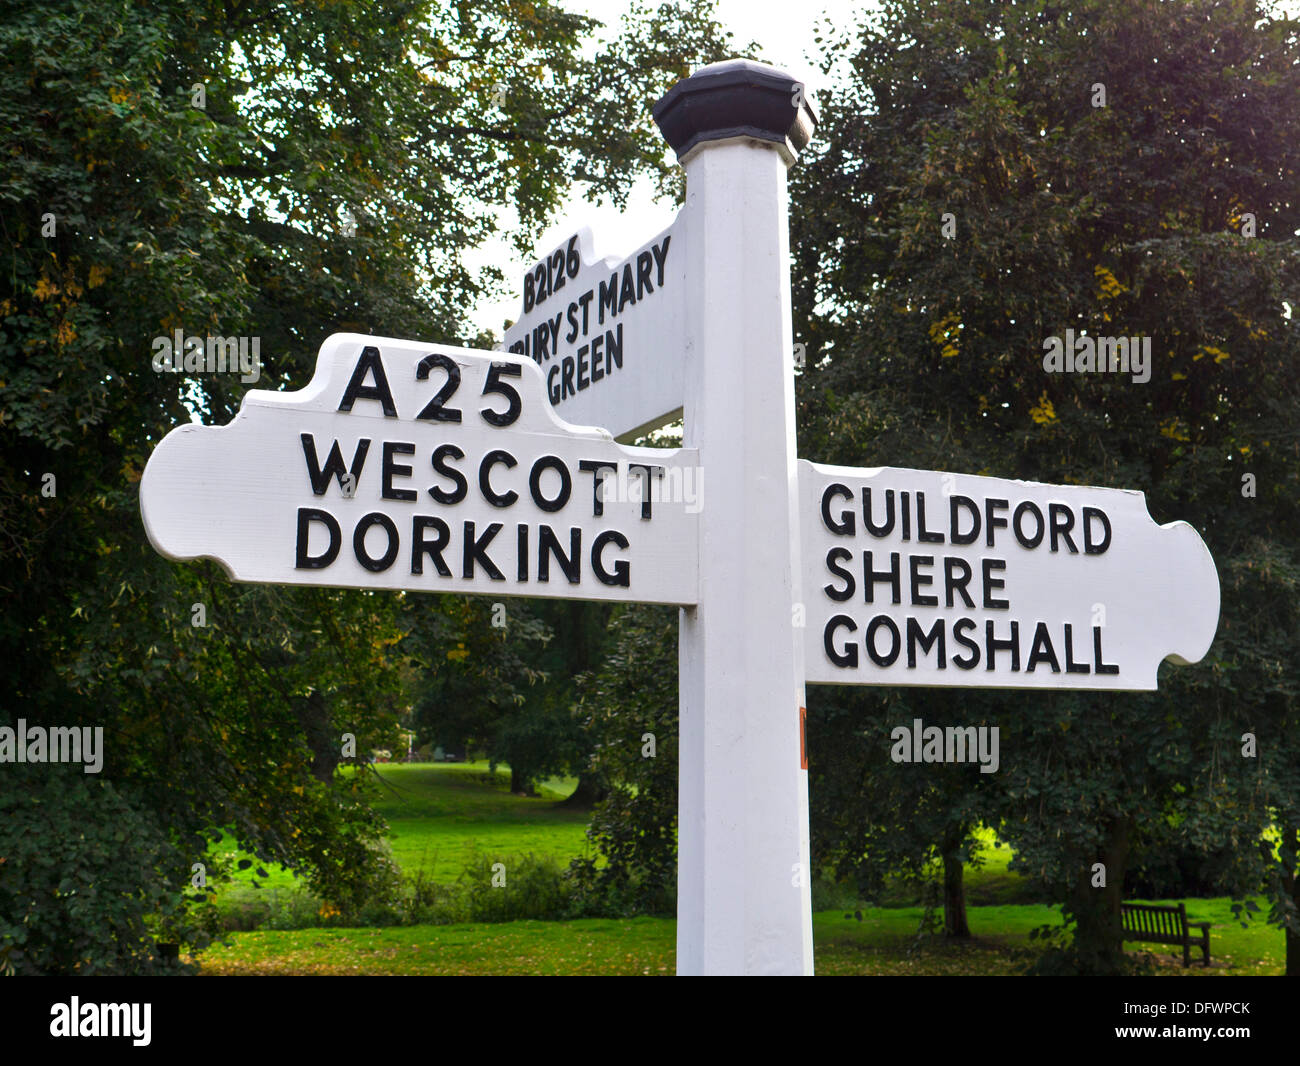 Traditional rural white English road sign on A 25 pointing towards Westcott and Dorking, Guildford Shere and Gomshall. Surrey UK Stock Photo